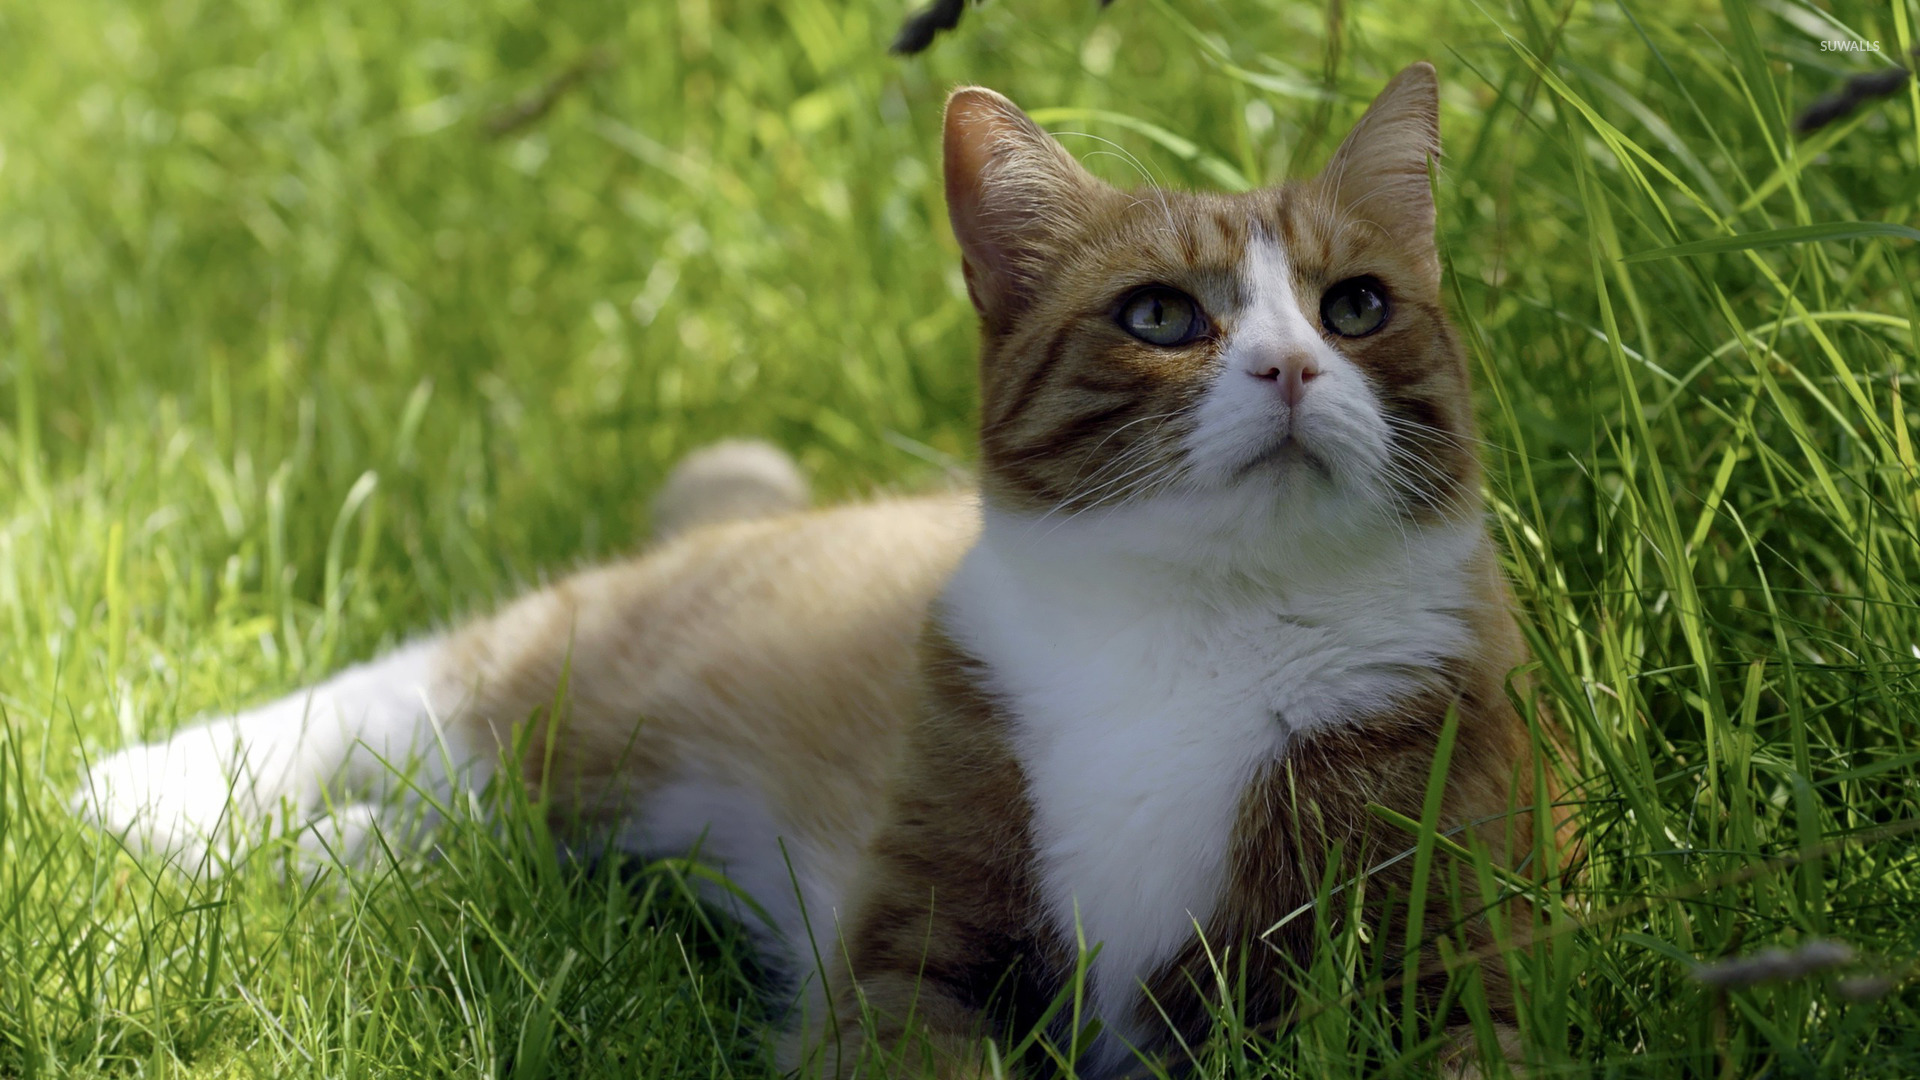 Cat sitting in the grass wallpaper - Animal wallpapers 